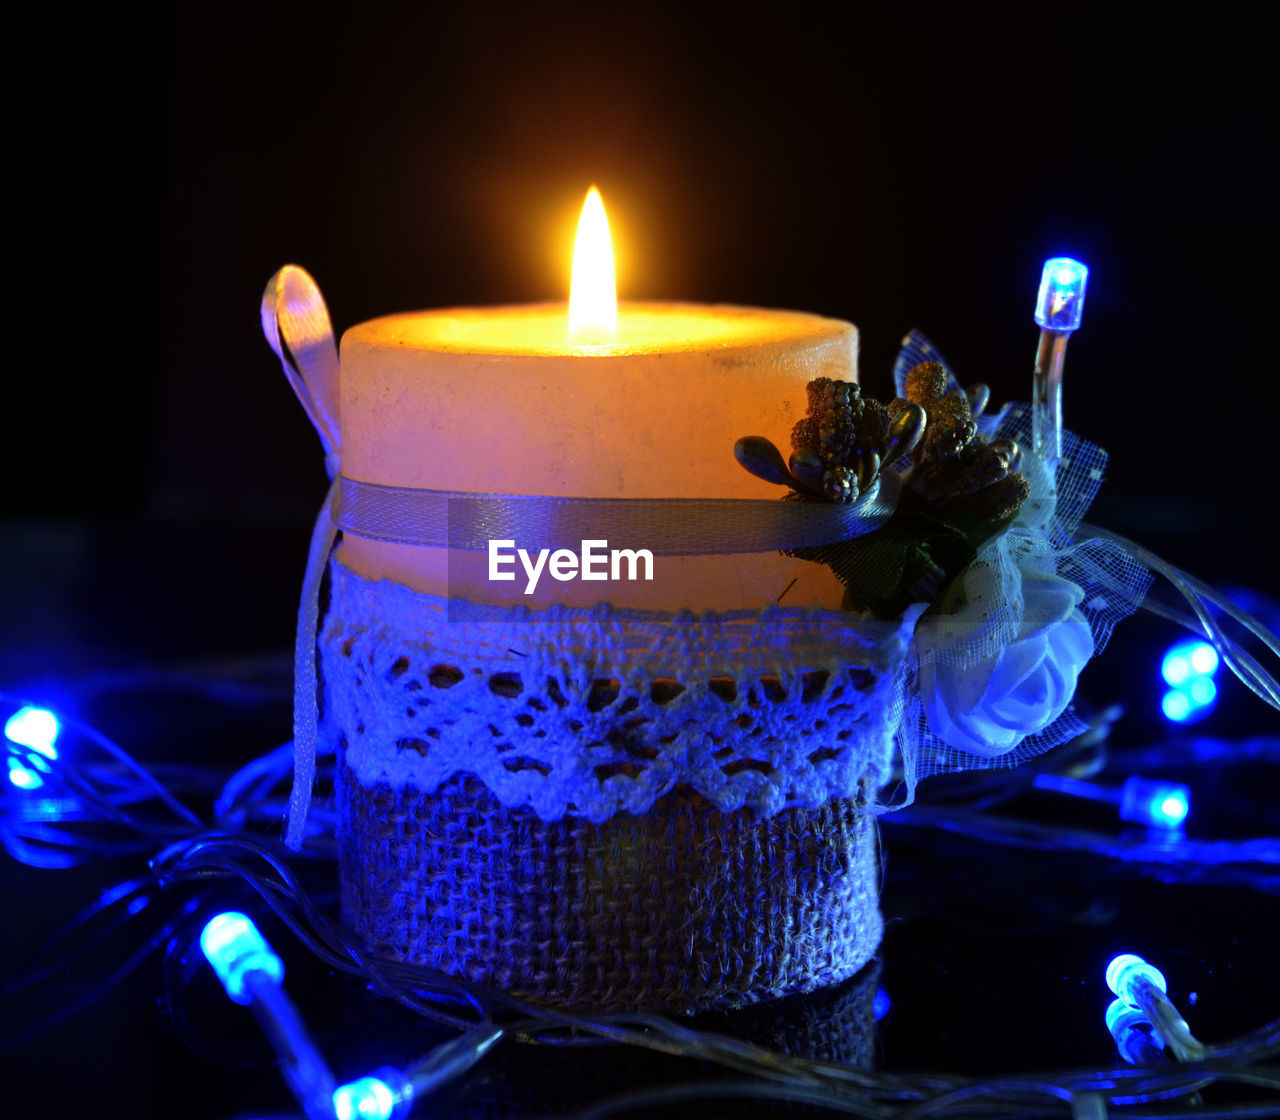 Close-up of lit candle with illuminated string lights on table against black background